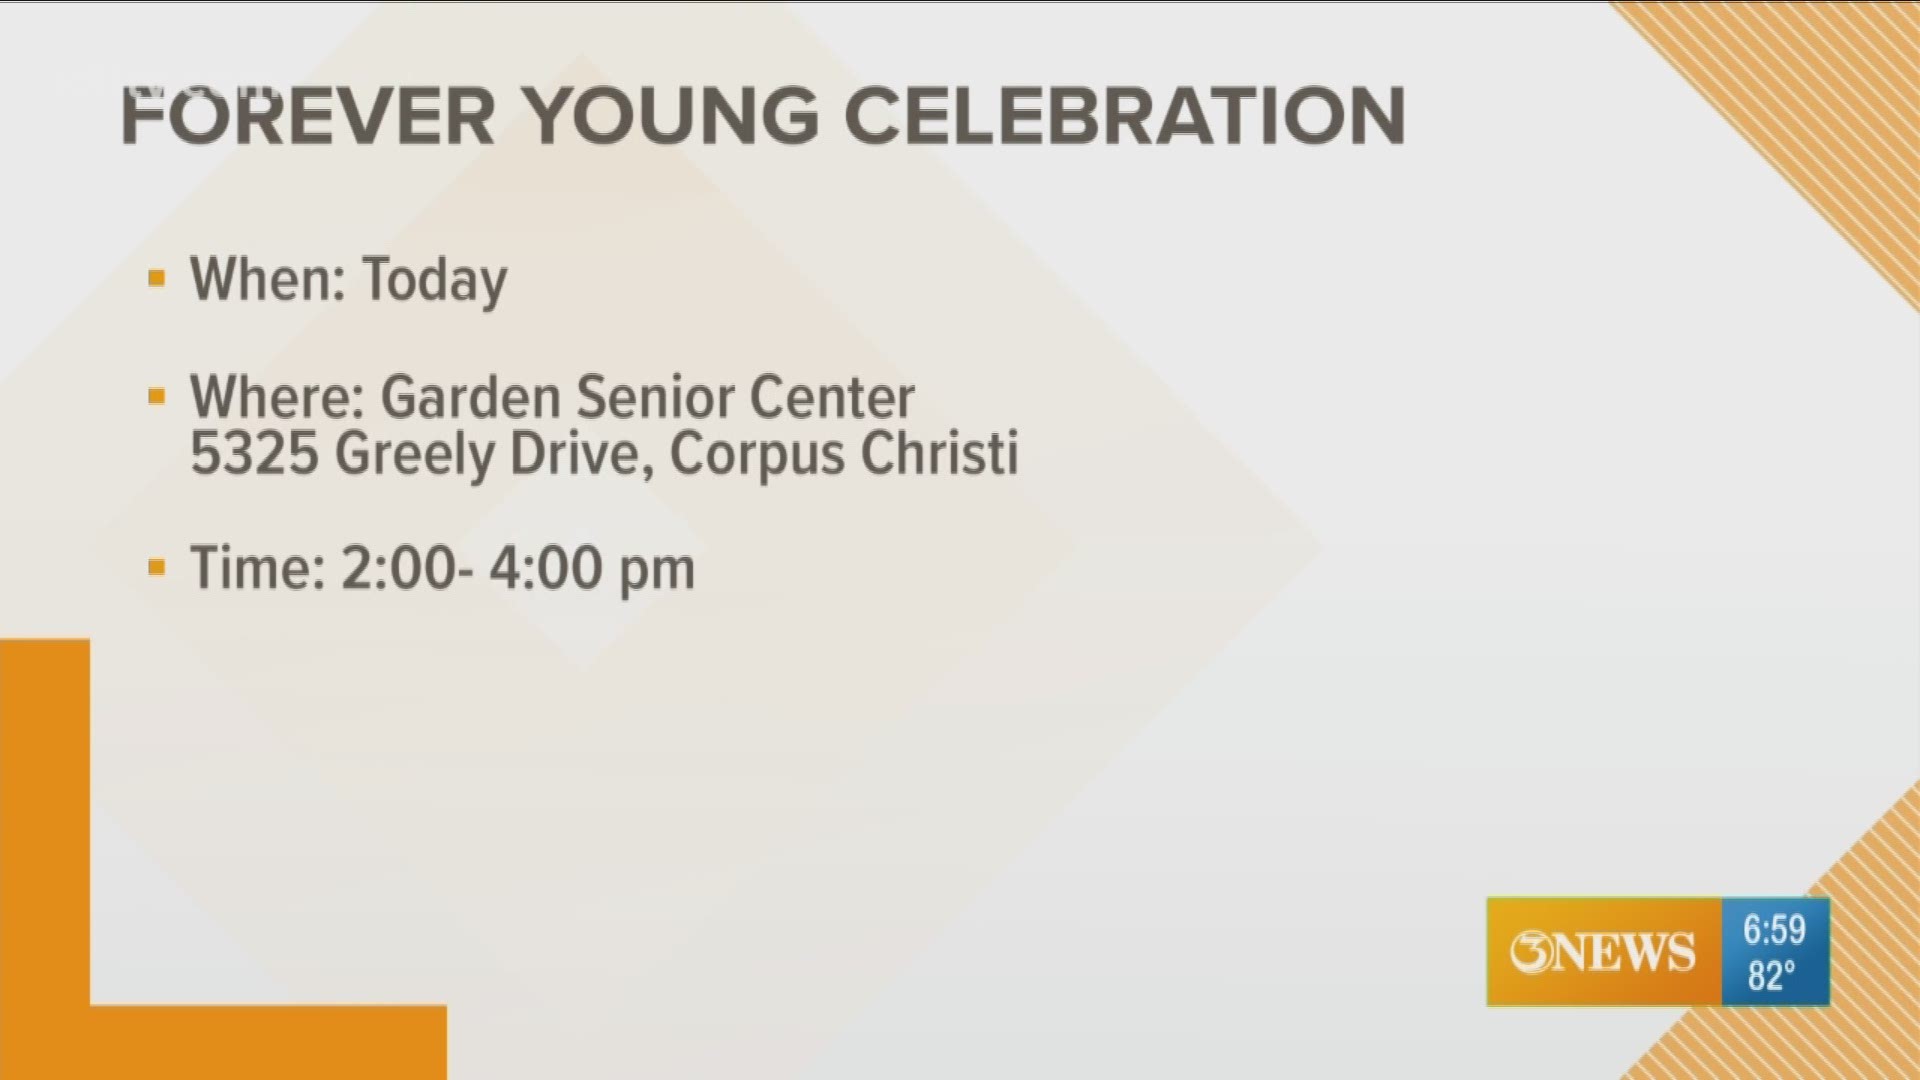 The Forever Young Celebration